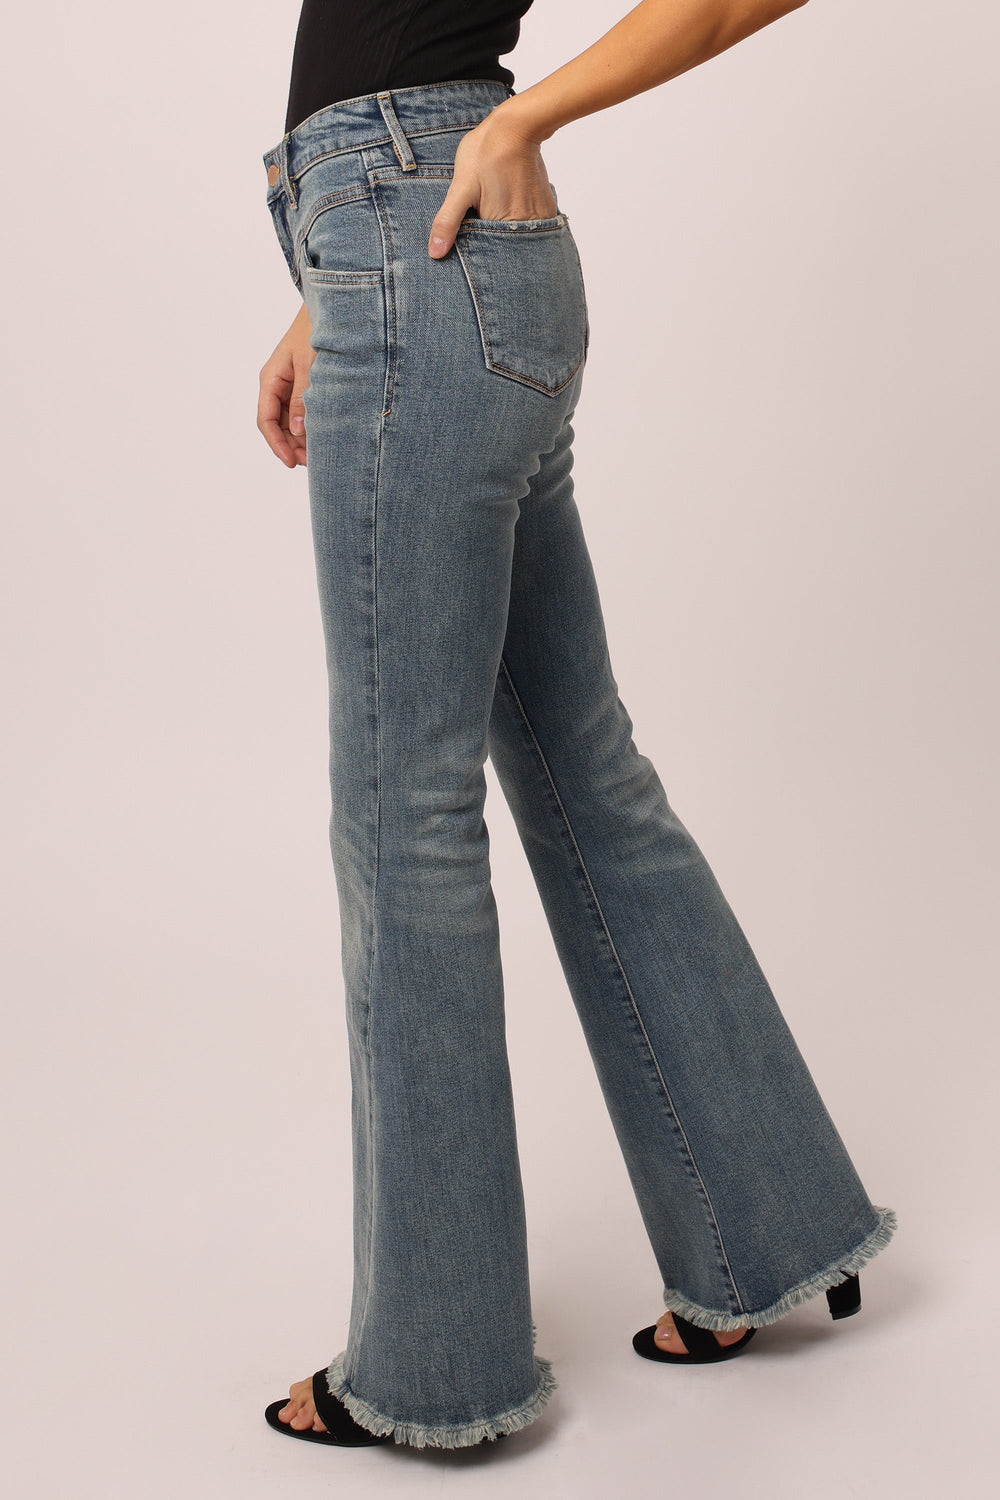 image of a female model wearing a ROSA HIGH RISE FLARE JEANS STOKES CANYON DEAR JOHN DENIM 